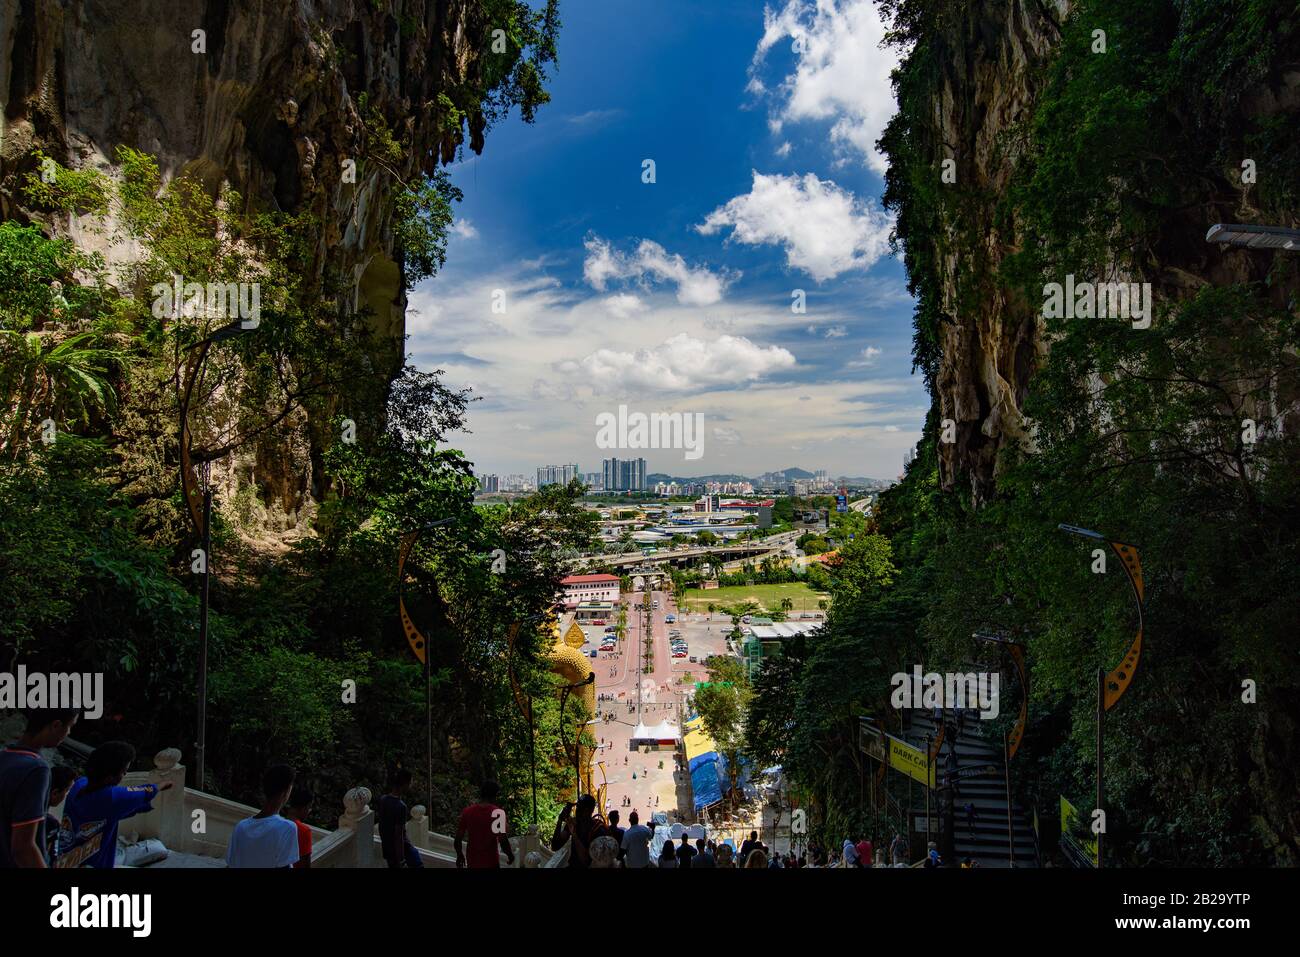 The view of the city from the top of Batu Caves in Kuala Lumpur, Malaysia Stock Photo